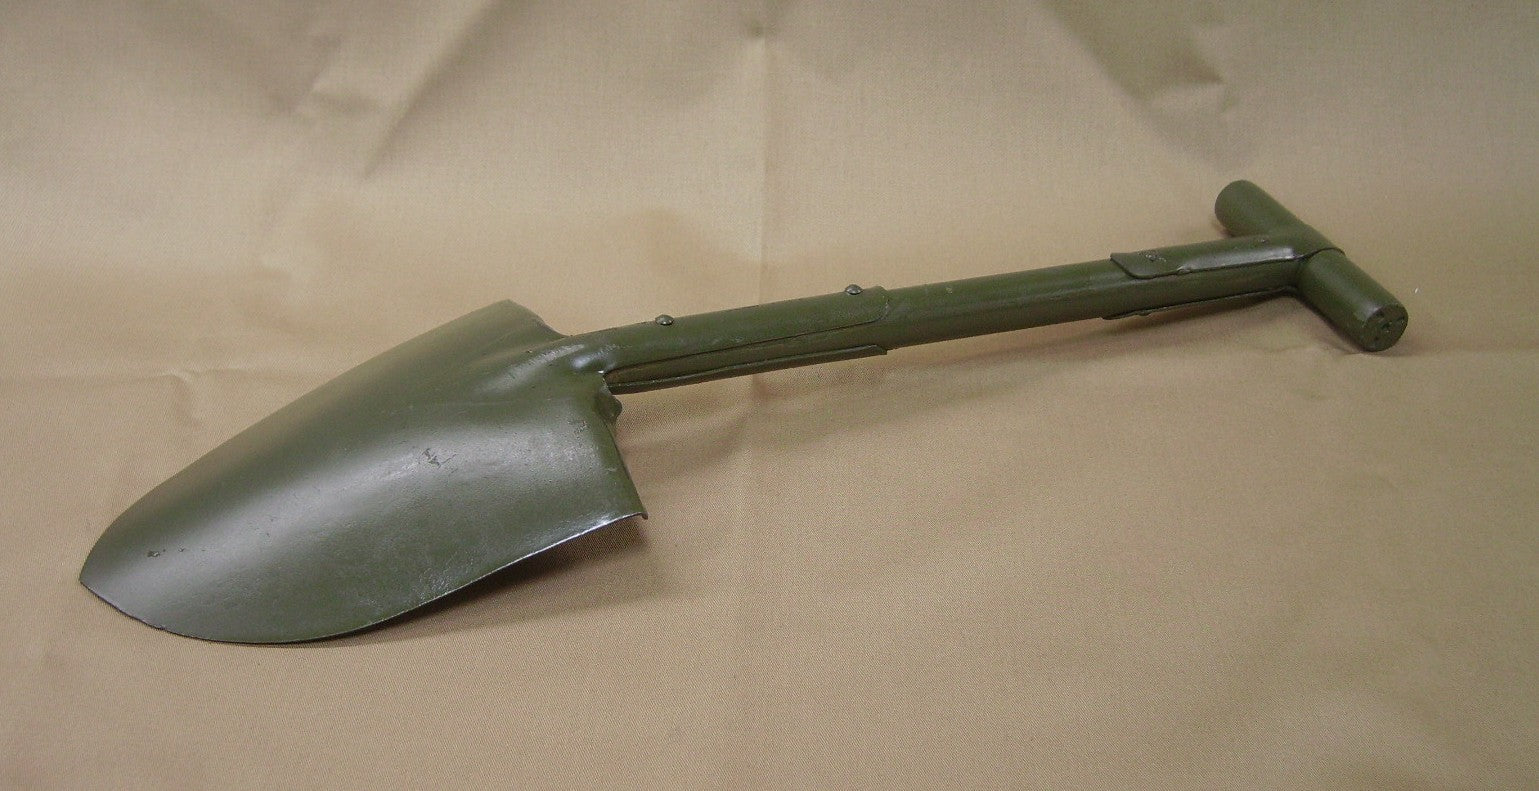 Tool, Intrenching, M1910 (T-handle, Replica)